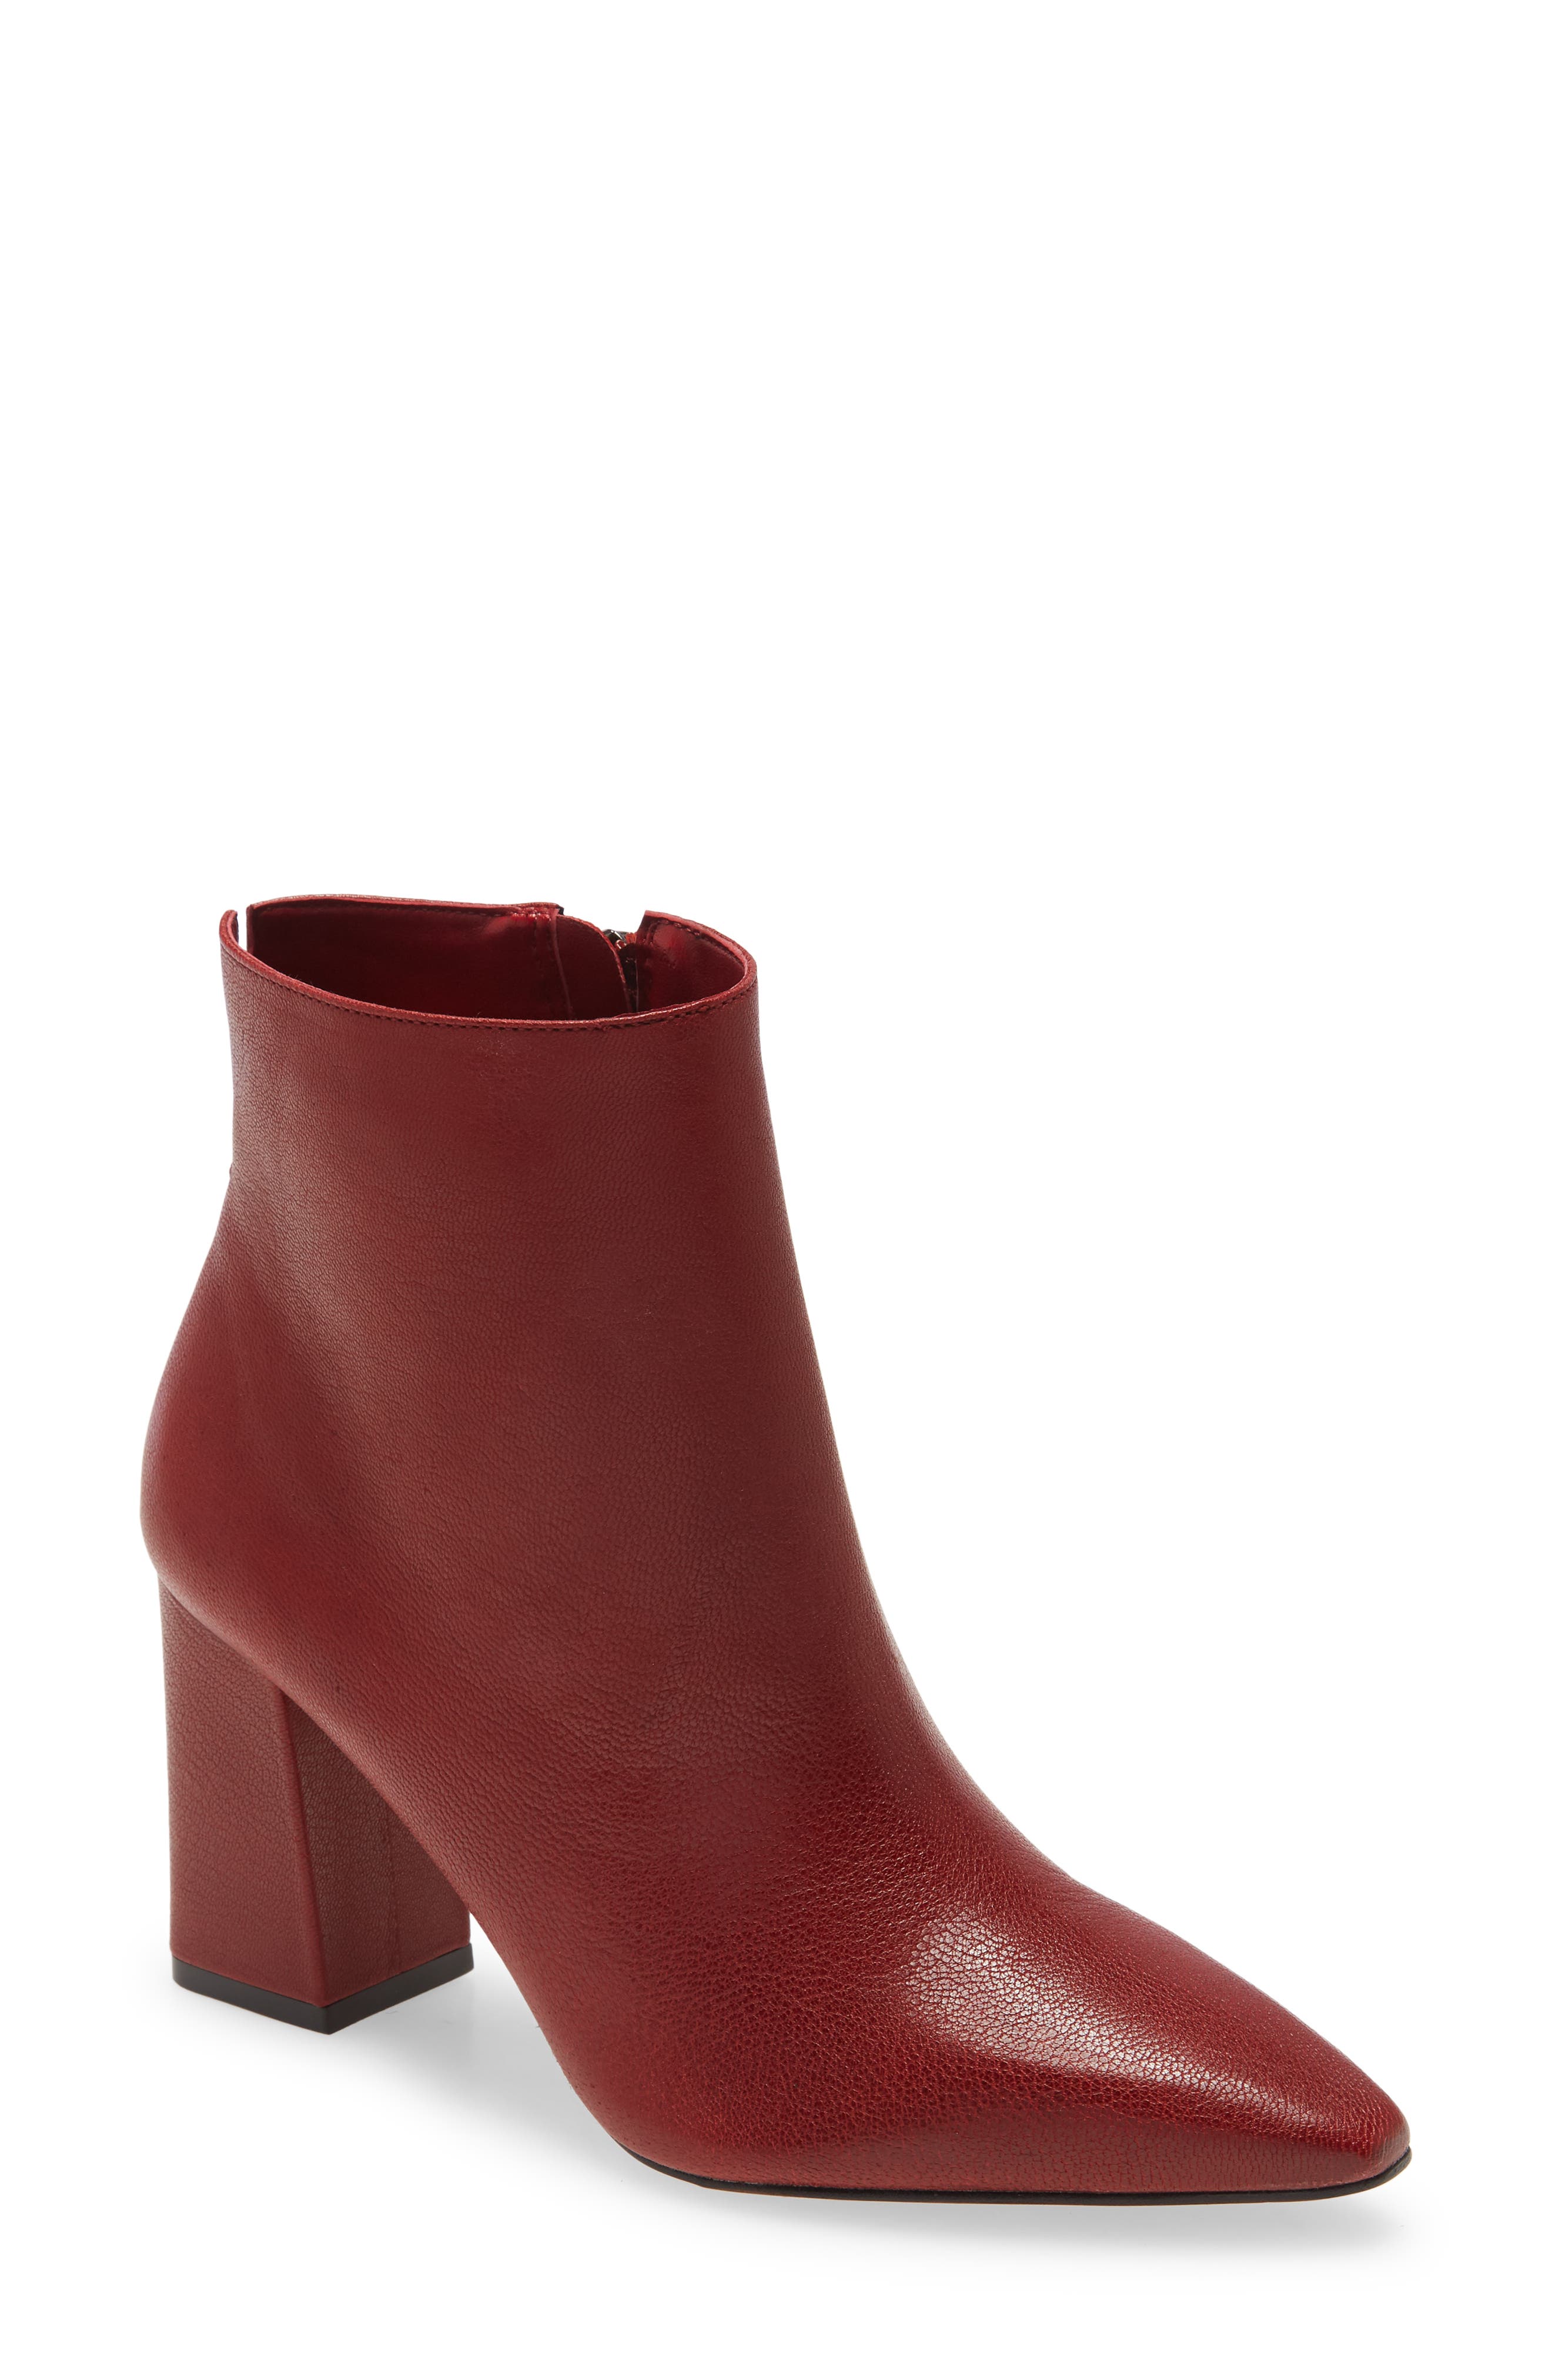 vince camuto booties nordstrom